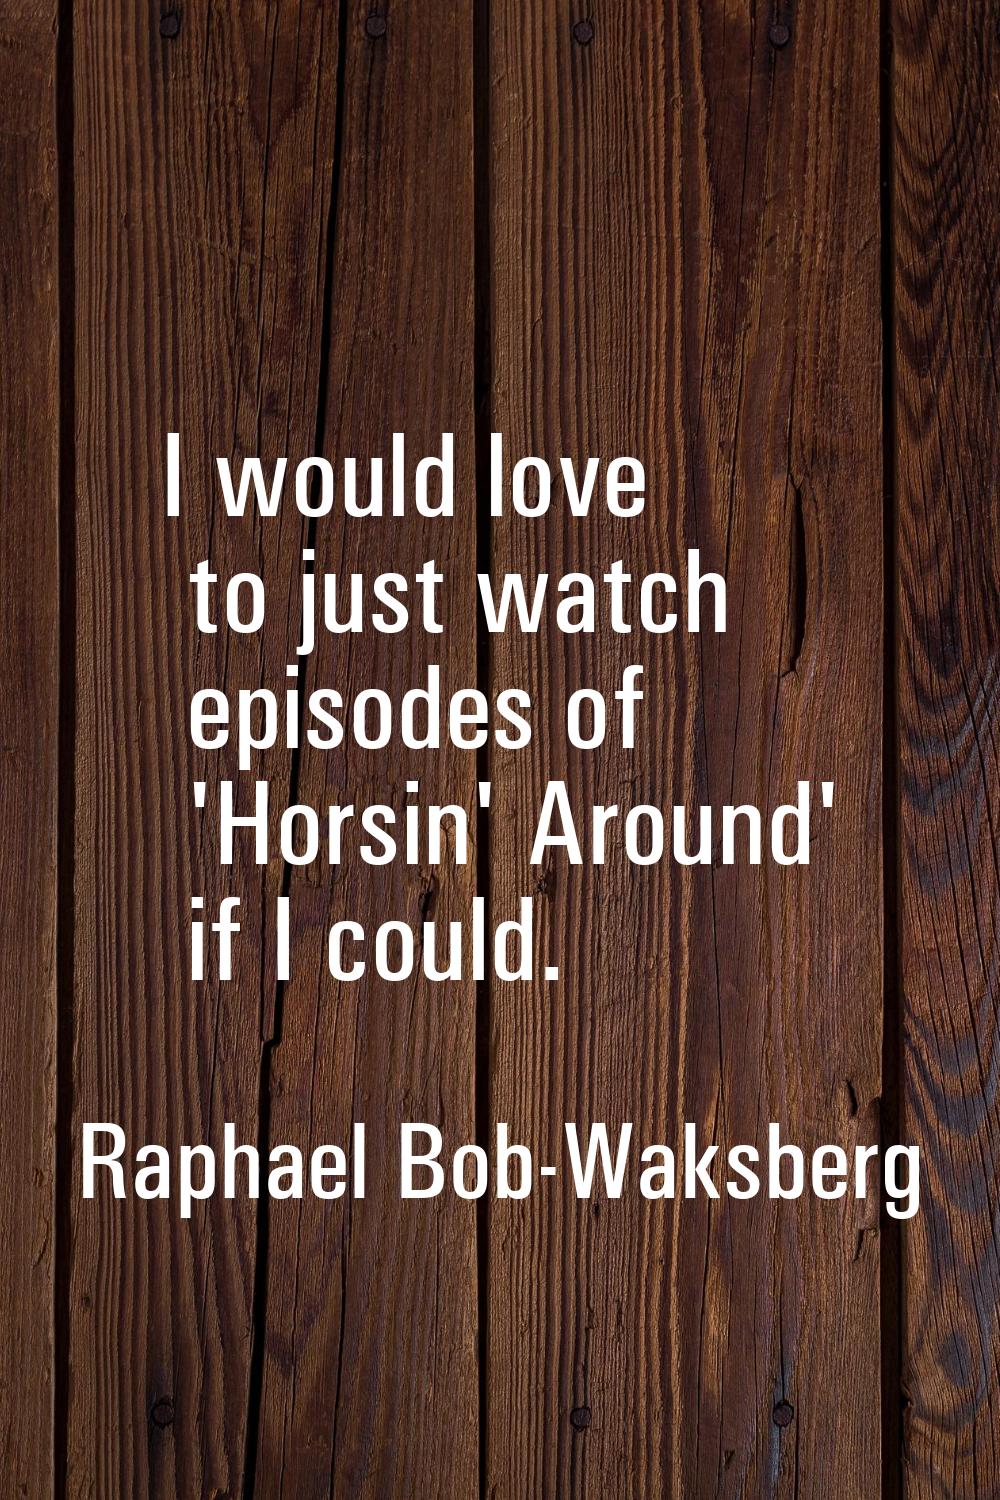 I would love to just watch episodes of 'Horsin' Around' if I could.